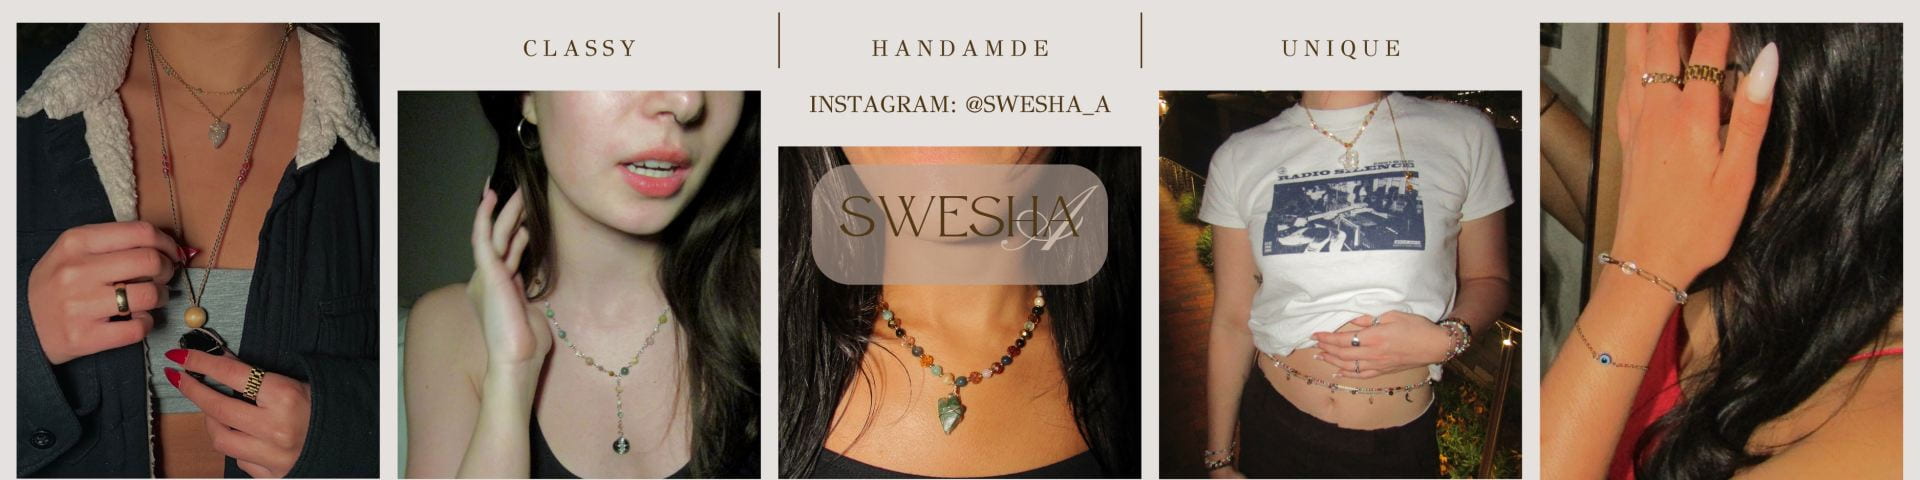 Some of SweshaA's jewelry products, which can be viewed on the business' Etsy page. Credit: Swesha Arora